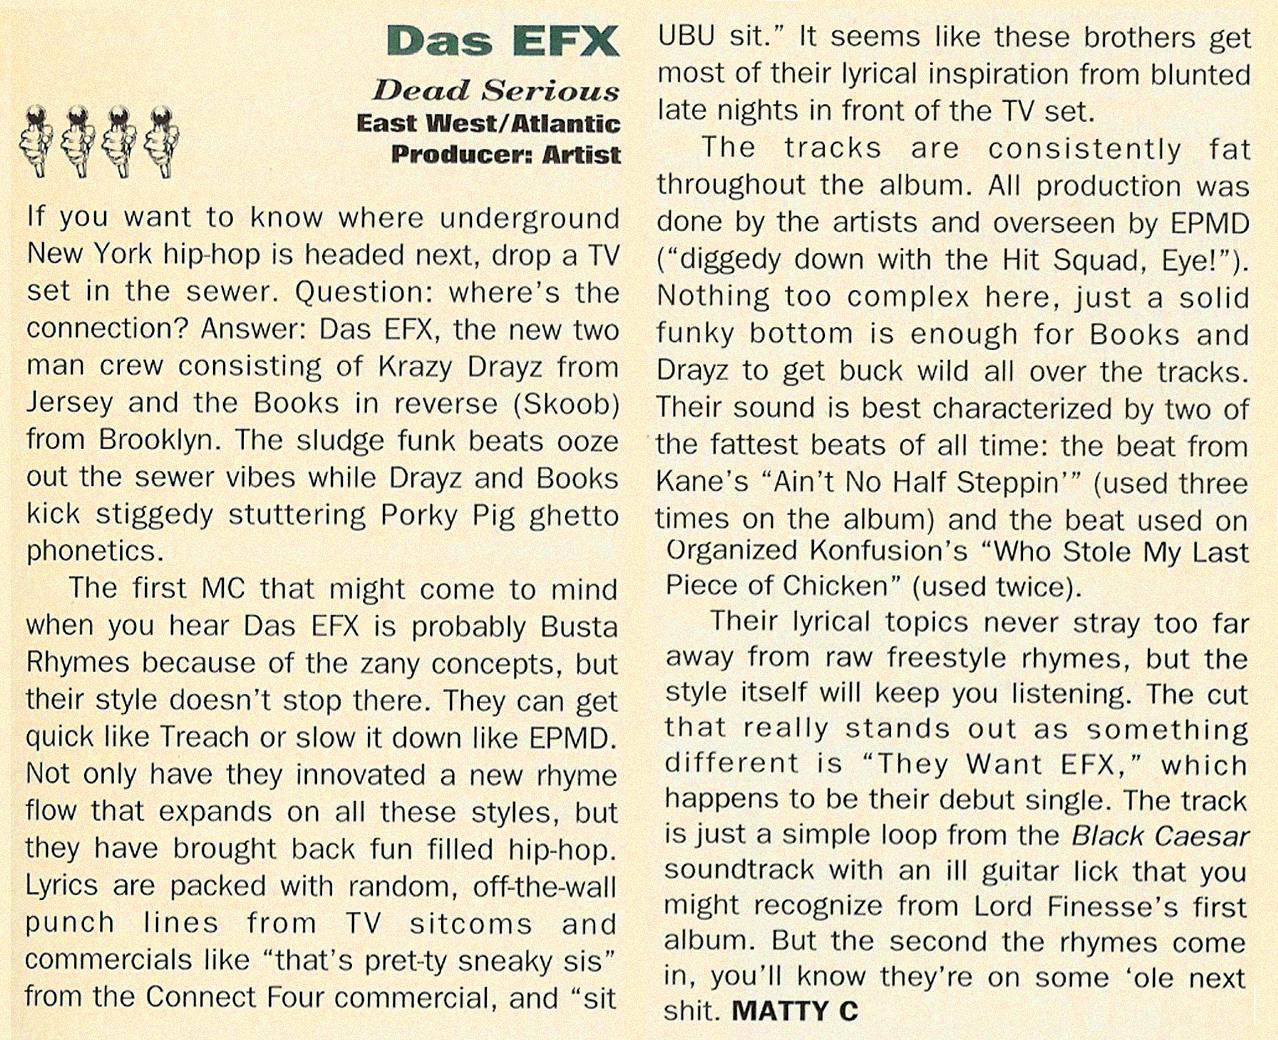 Matty C's review of 'Dead Serious' by Das EFX in The Source